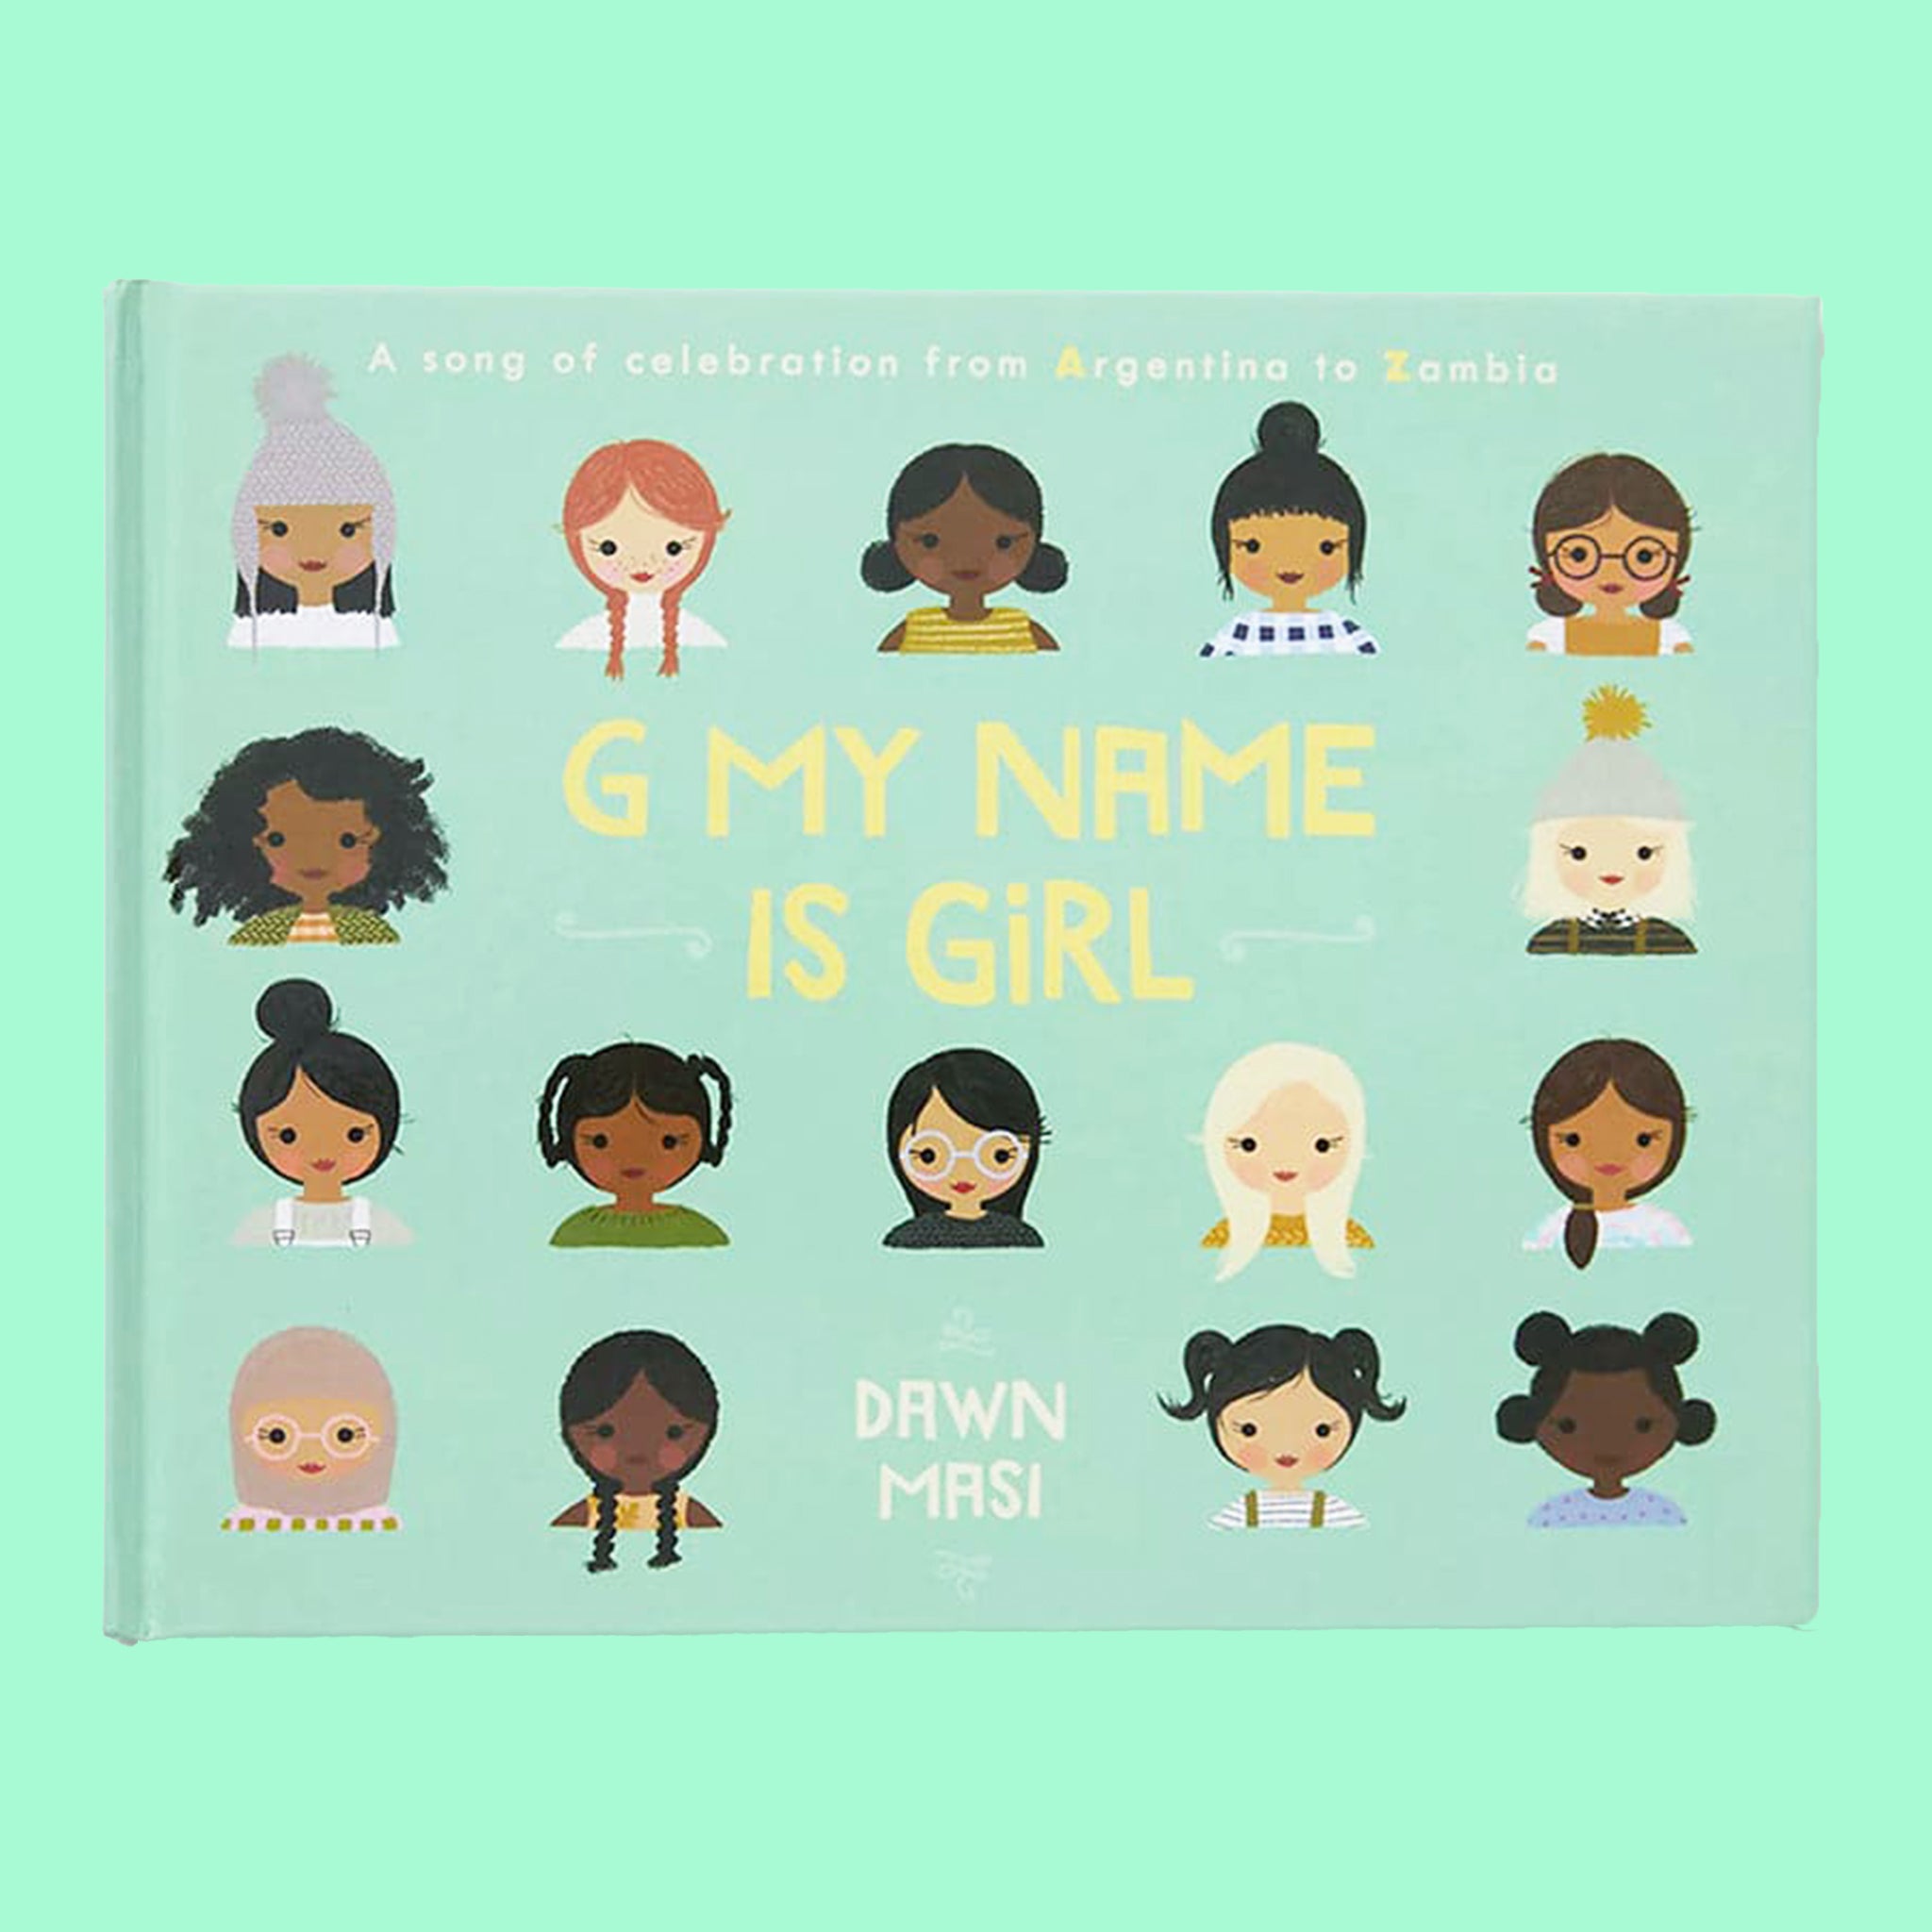 On a green background is a teal children&#39;s book cover with illustrations of all different races and ethnicities of girls along with a yellow title in the center that reads, &quot;G My Name Is Girl&quot;